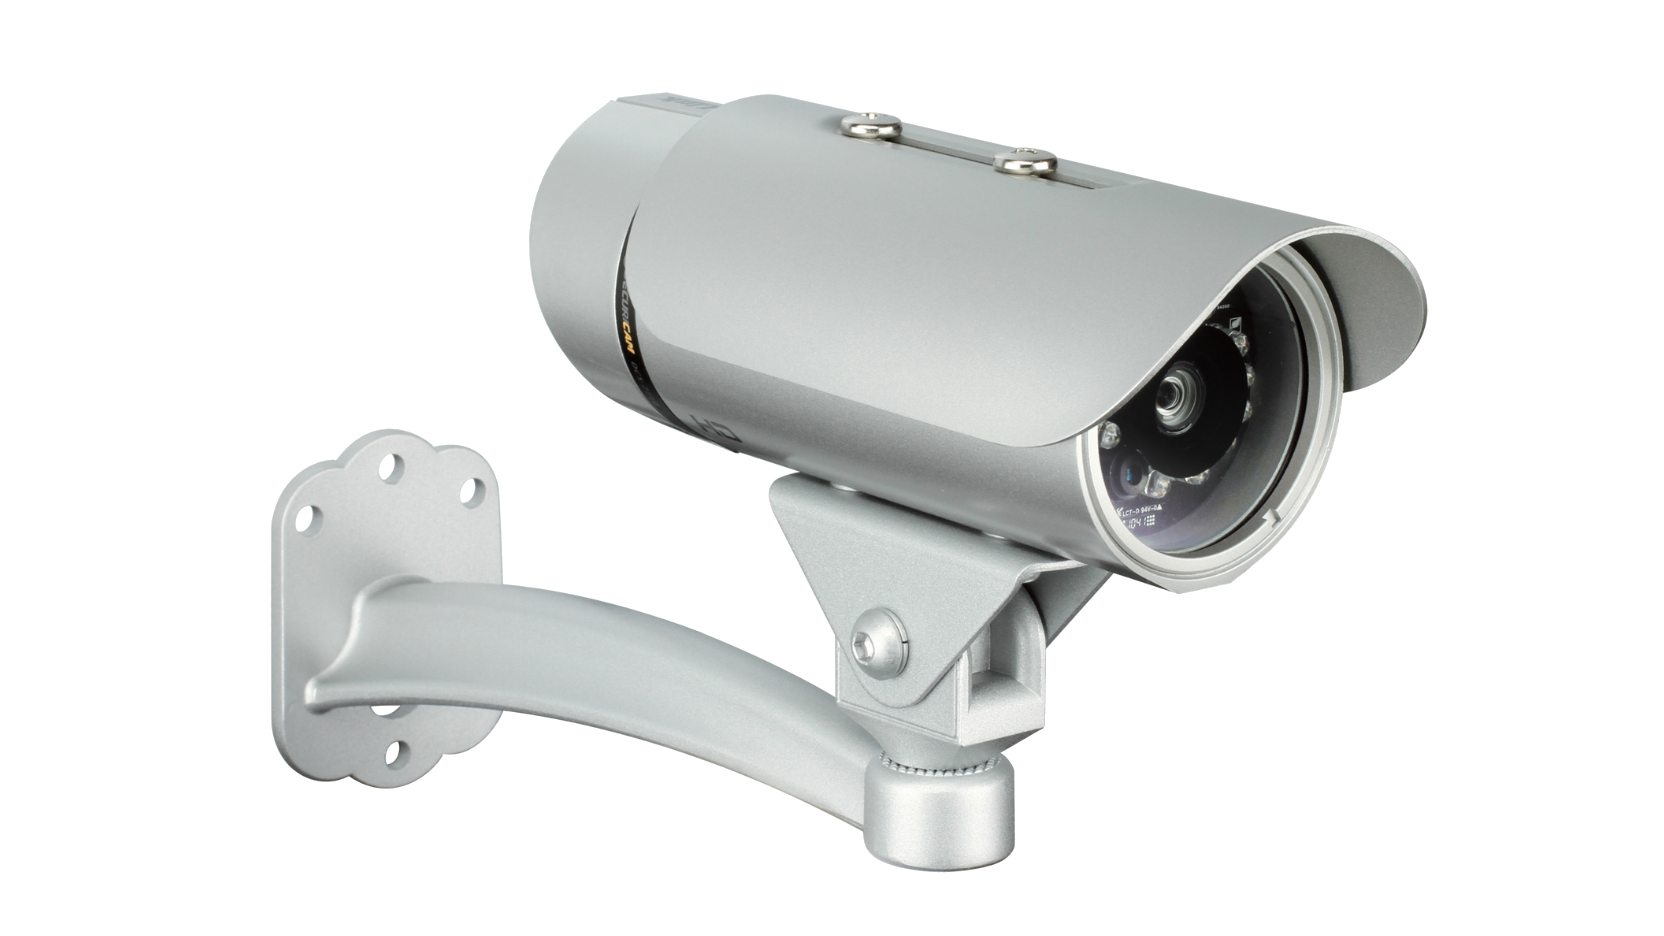 Outdoor Full Hd Poe Day/night Fixed Bullet Network Camera - Outdoor, Transparent background PNG HD thumbnail